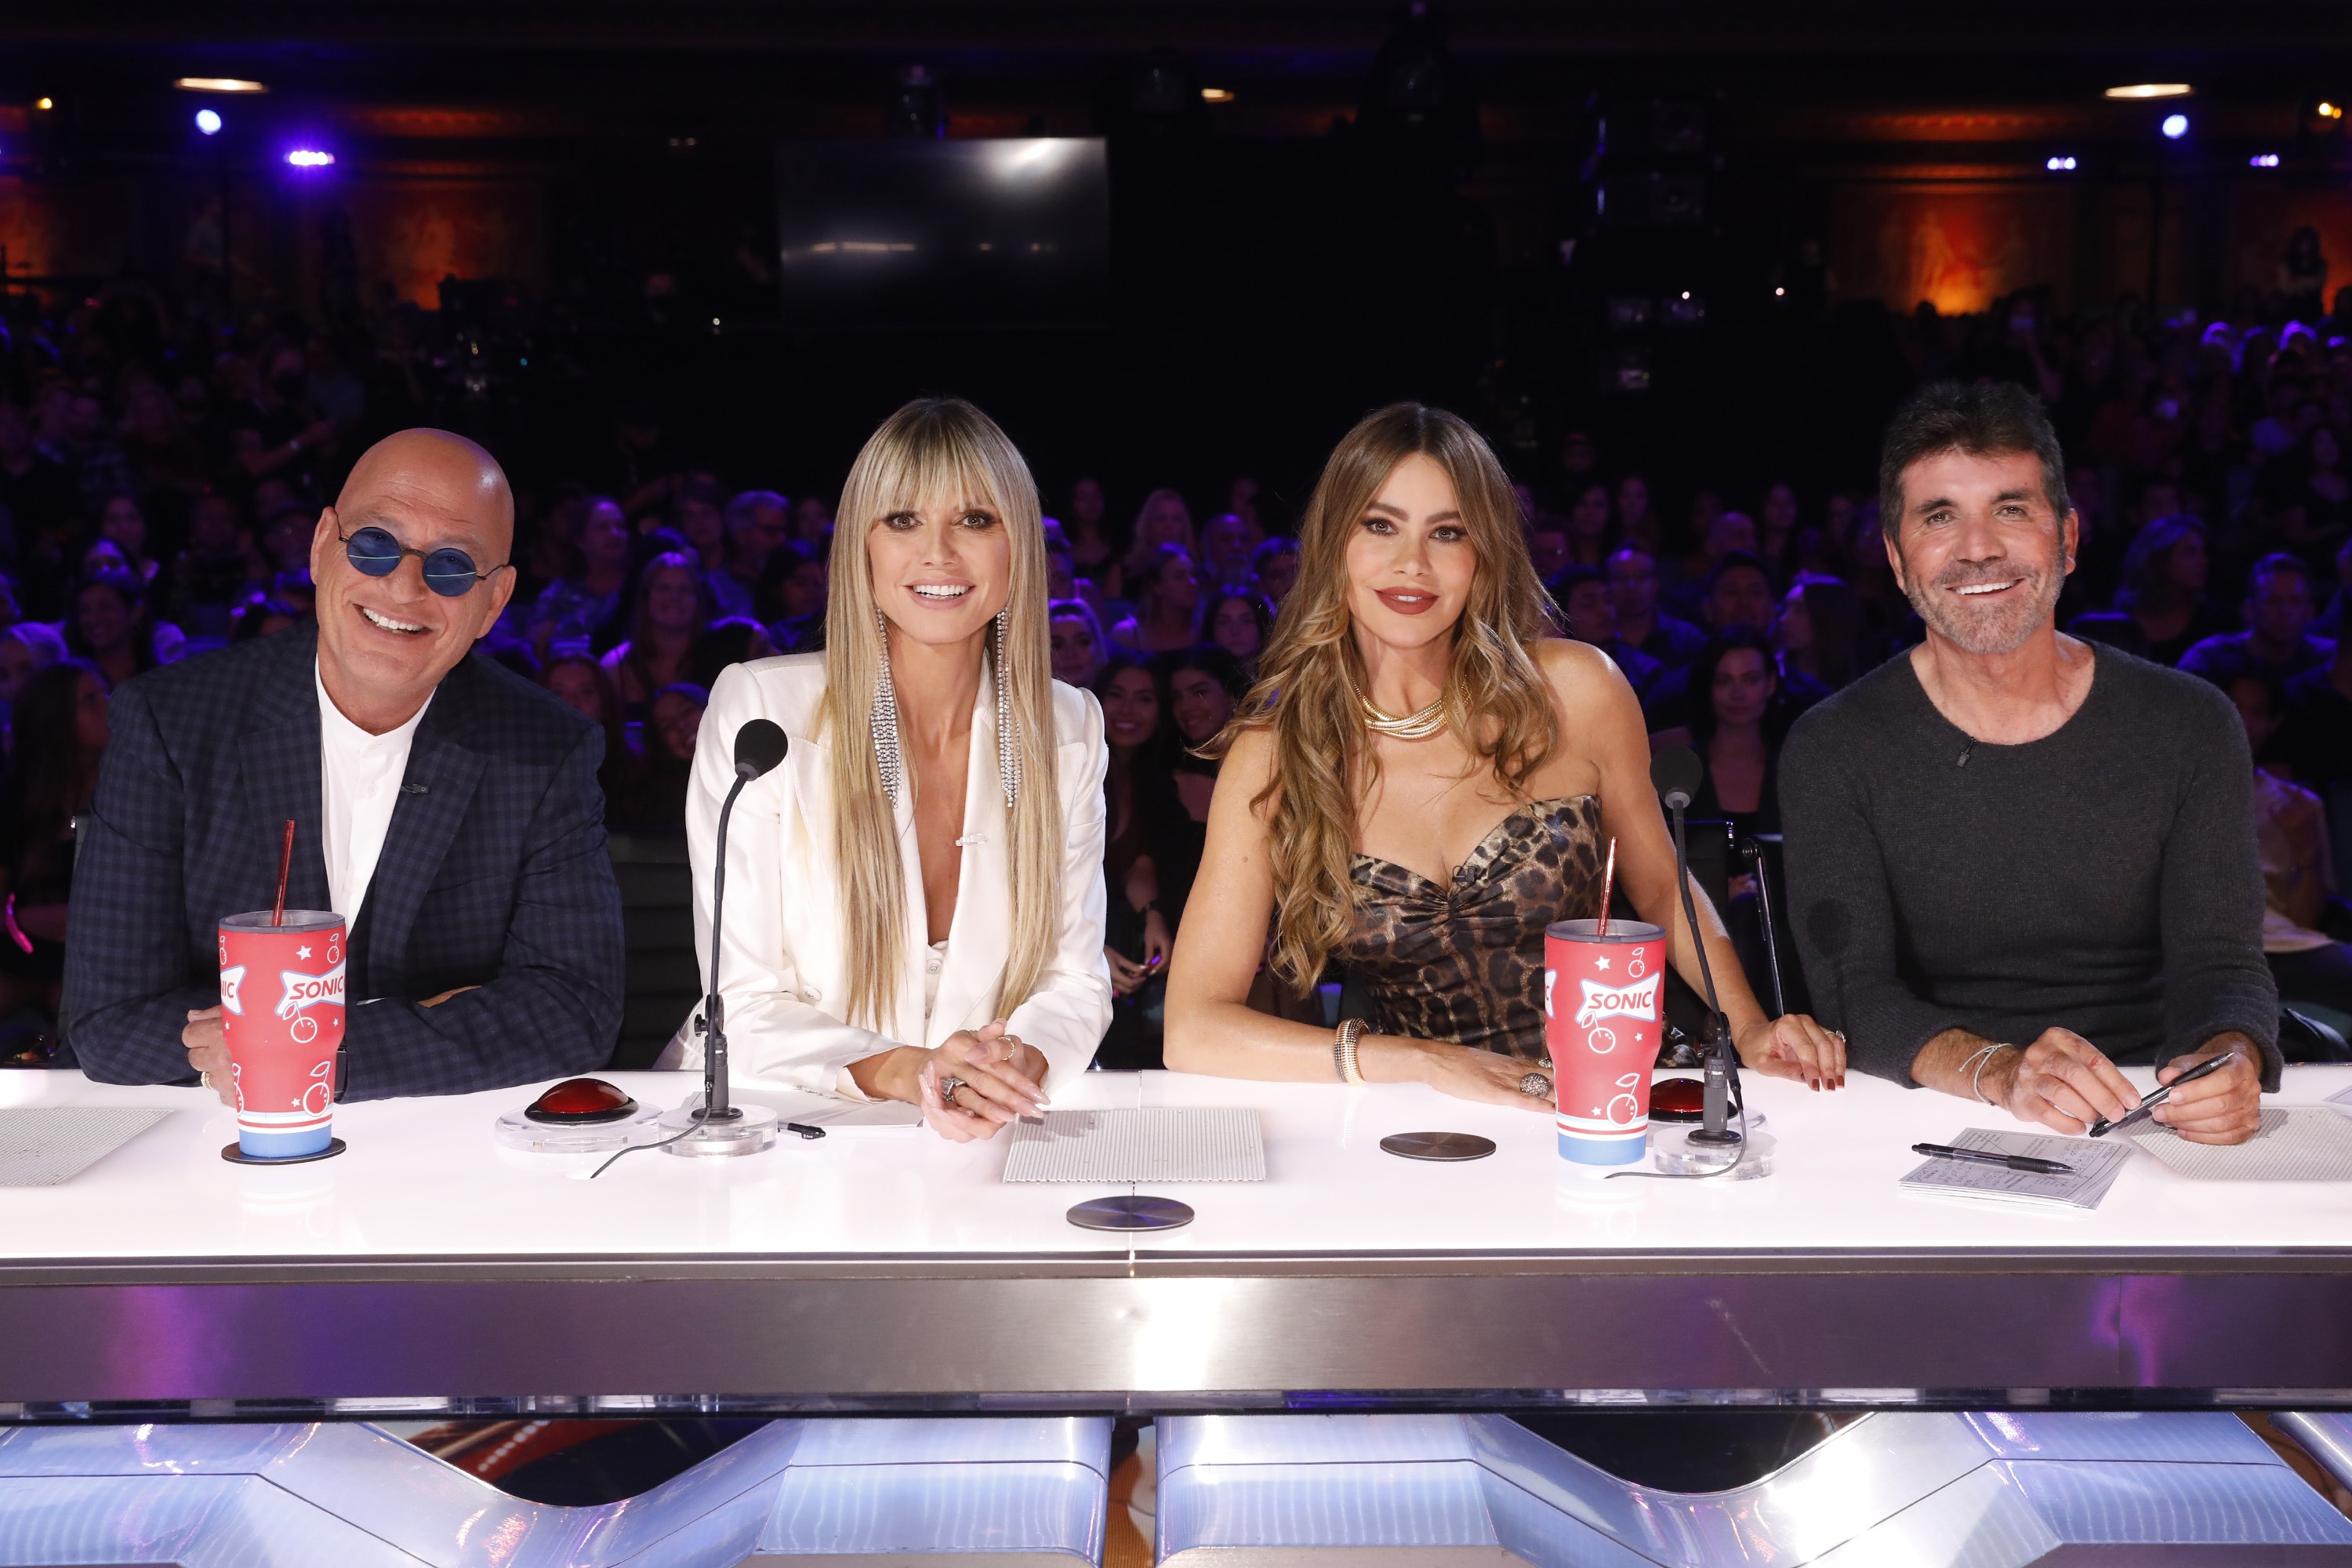 Only Sofia's AGT co-host Simon Cowell attended her Netflix premiere